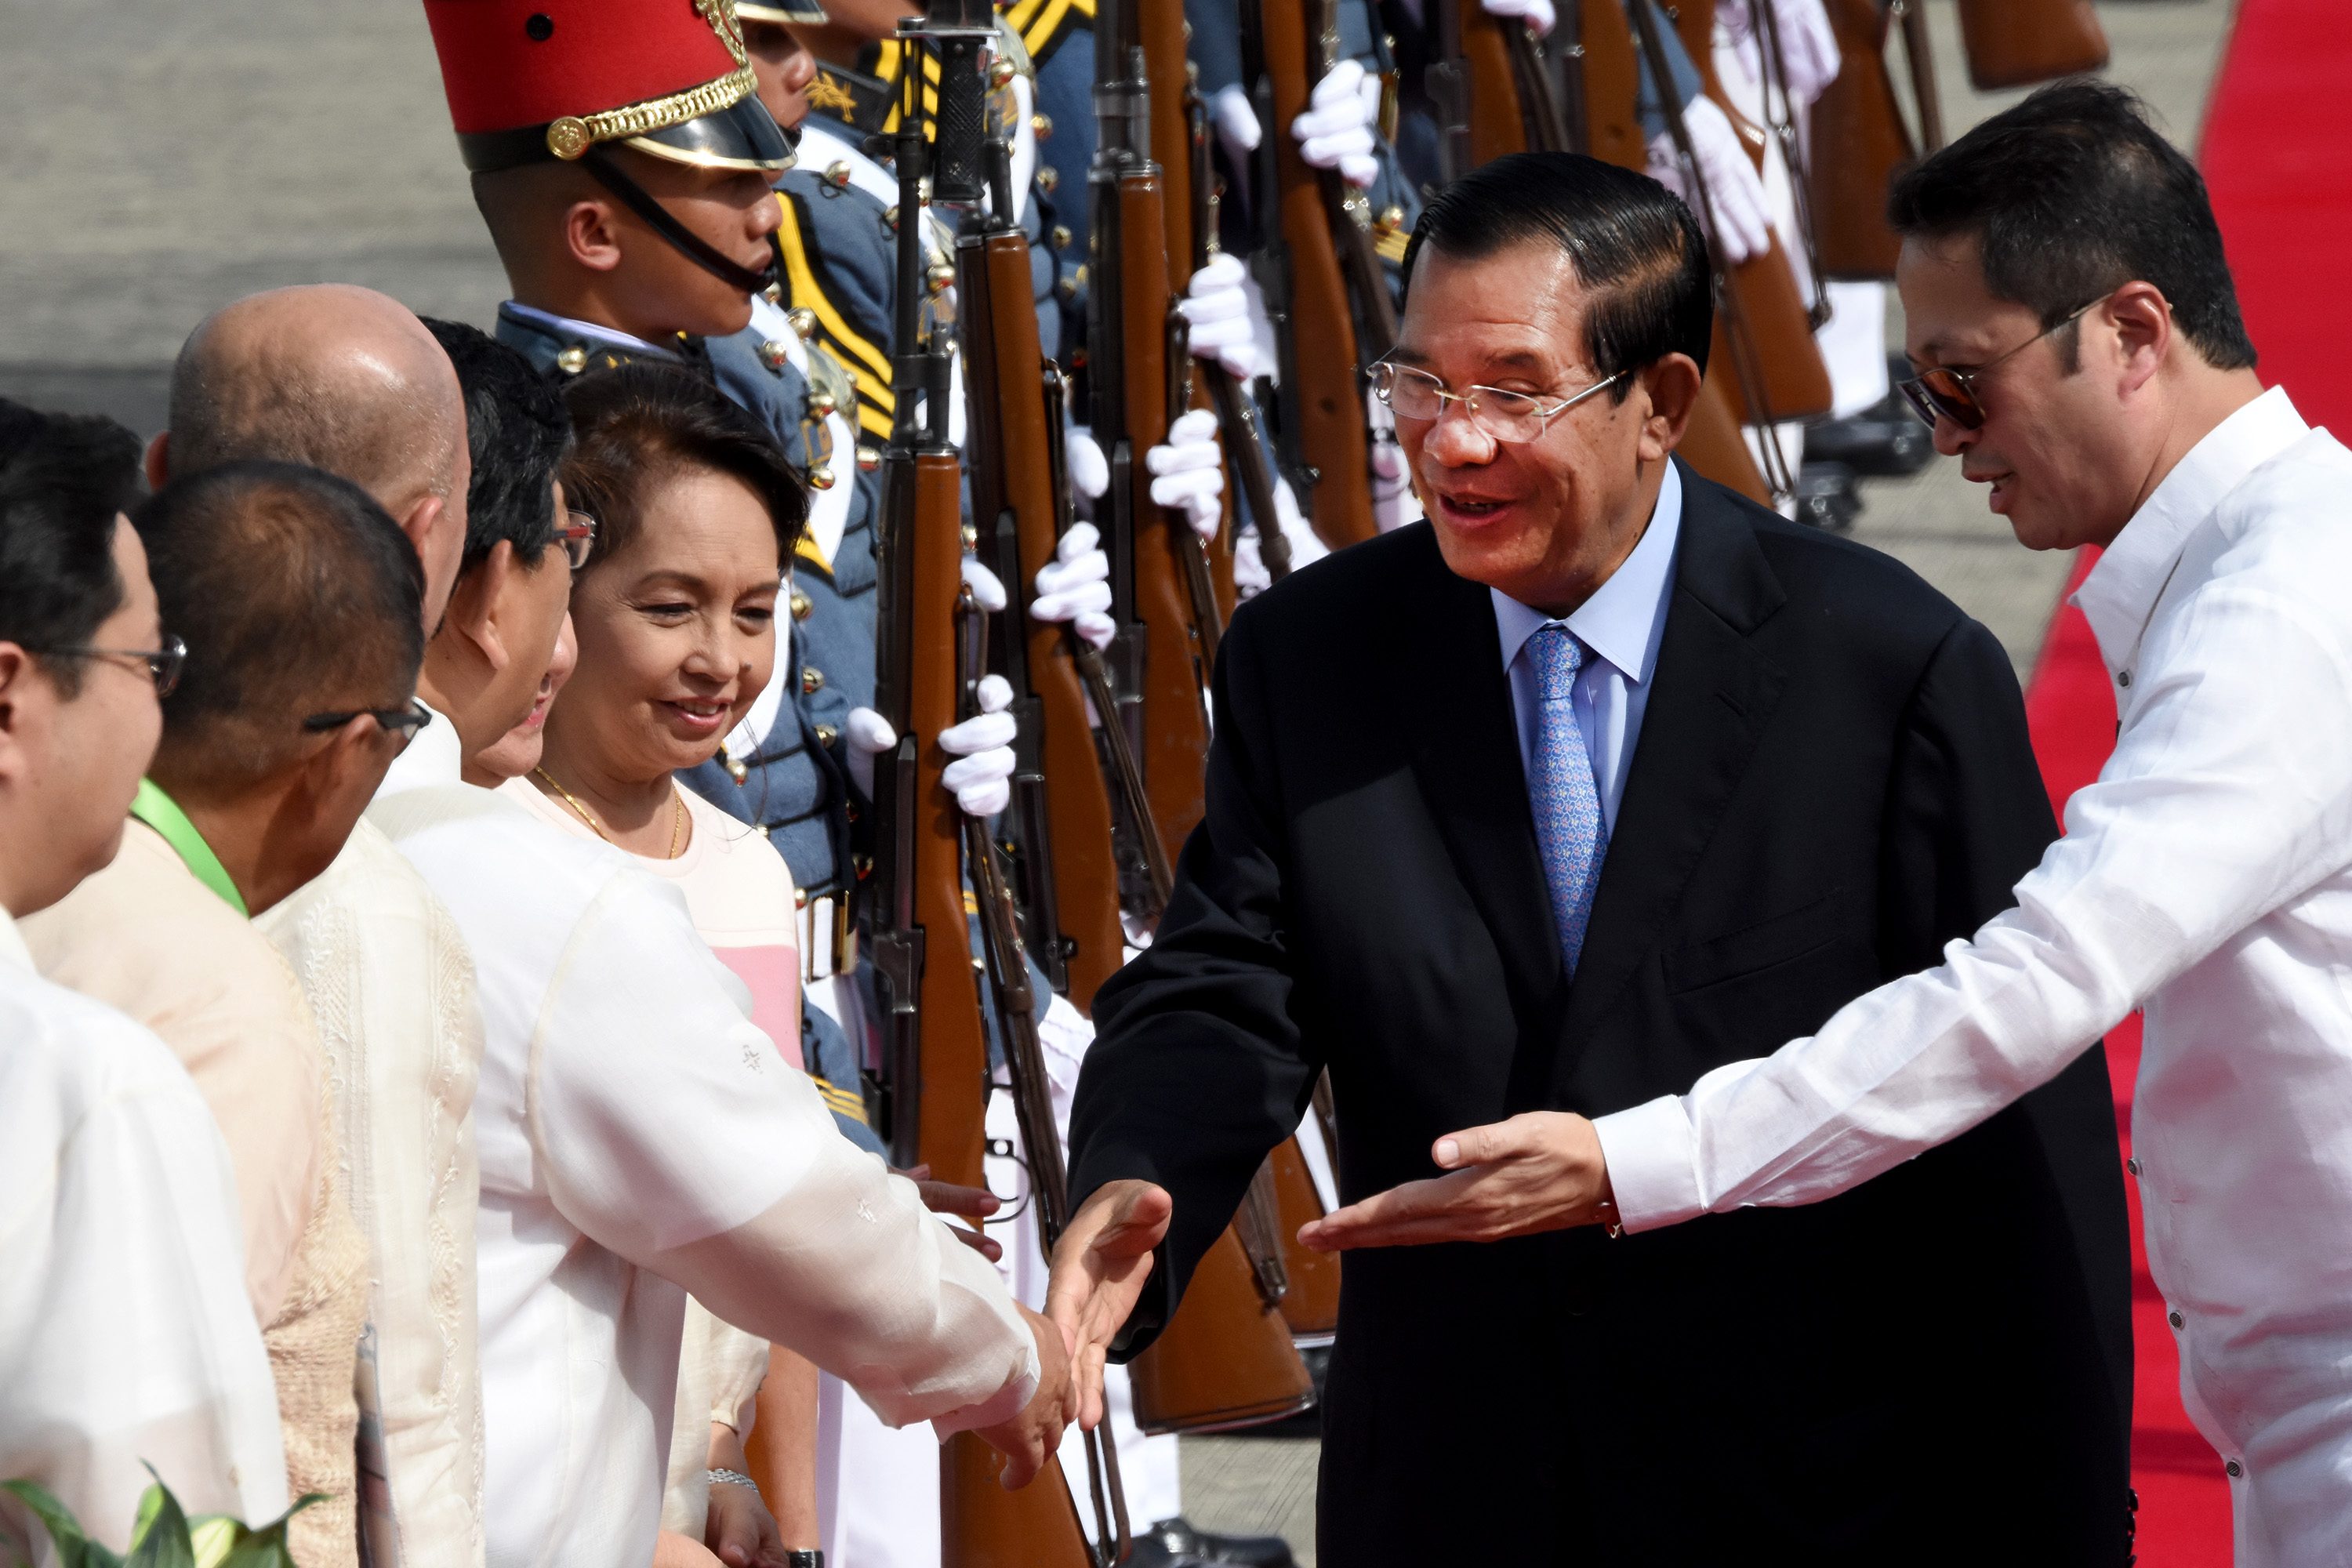 LIVELY WELCOME. Cambodian Prime Minister Hun Sen is welcomed to the Philippines by Defense Secretary Delfin Lorenzana and former president Gloria Macapagal Arroyo on November 11, 2017. Photo by Angie de Silva/Rappler  